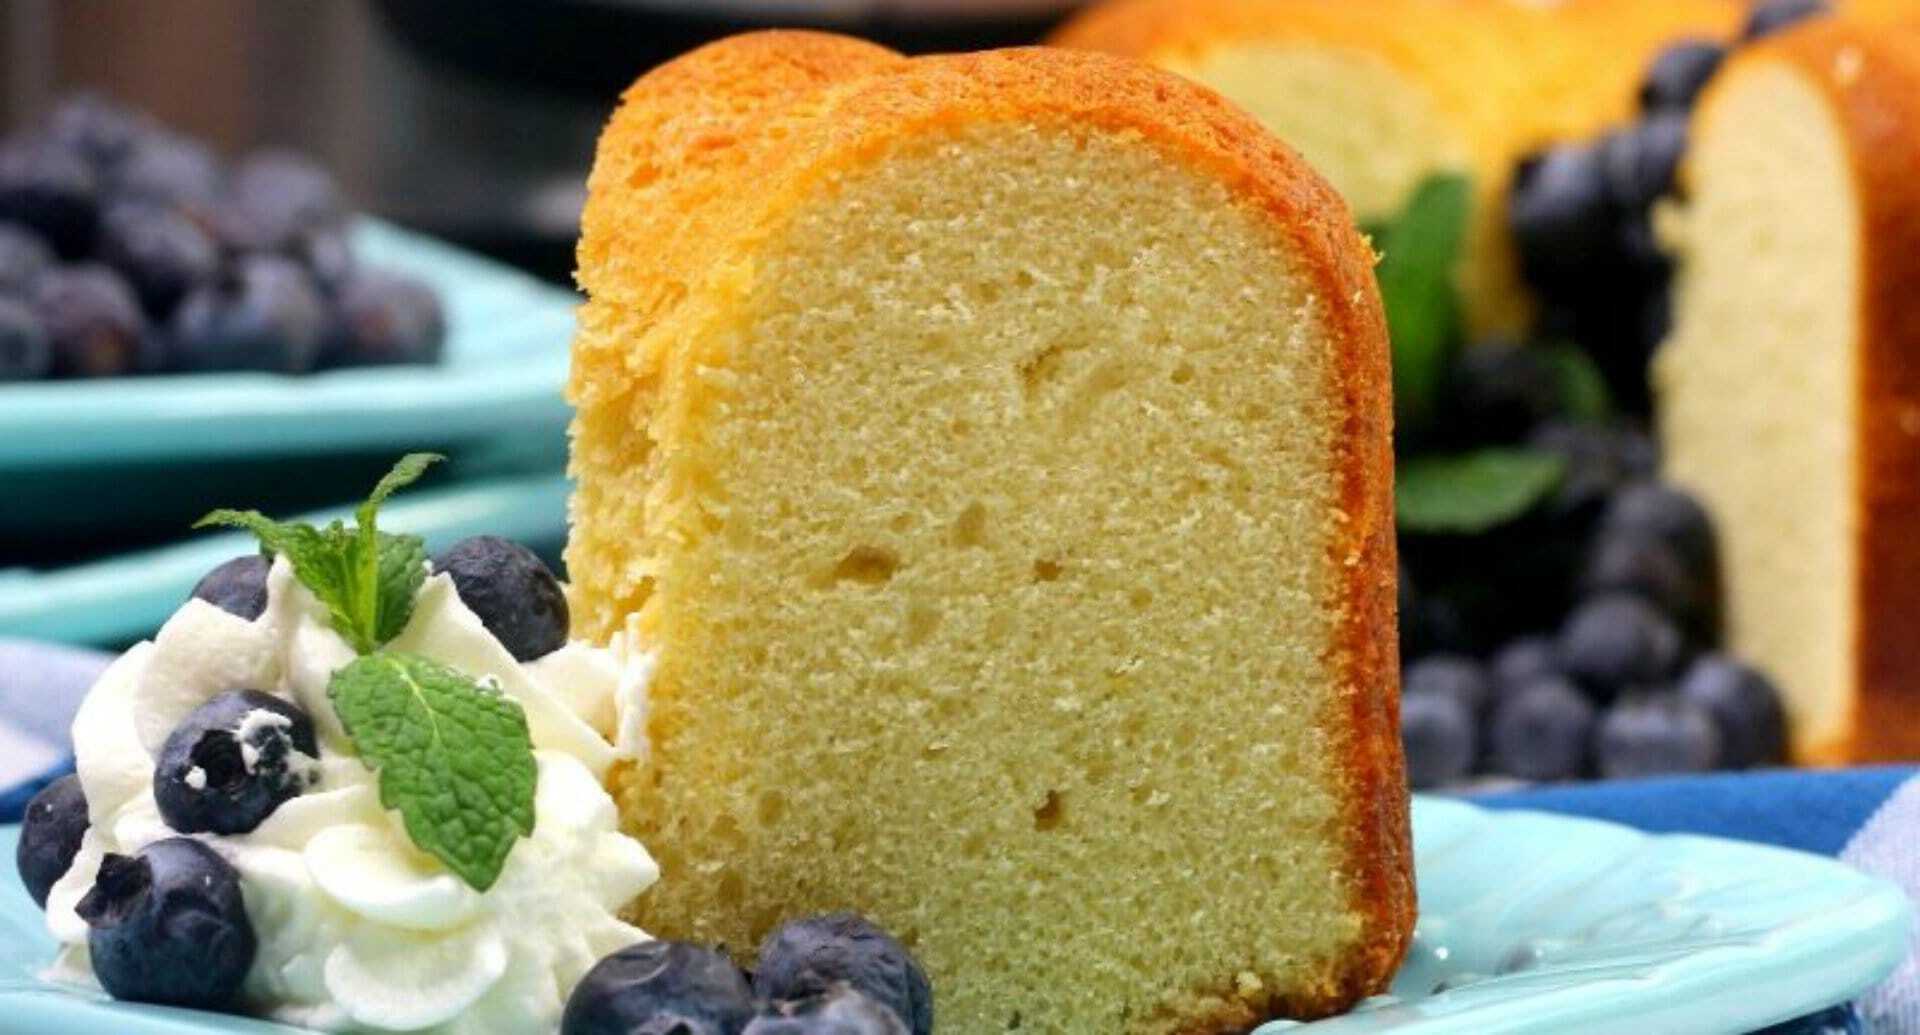 How to Make a Pound Cake: Pressure Cooker Method